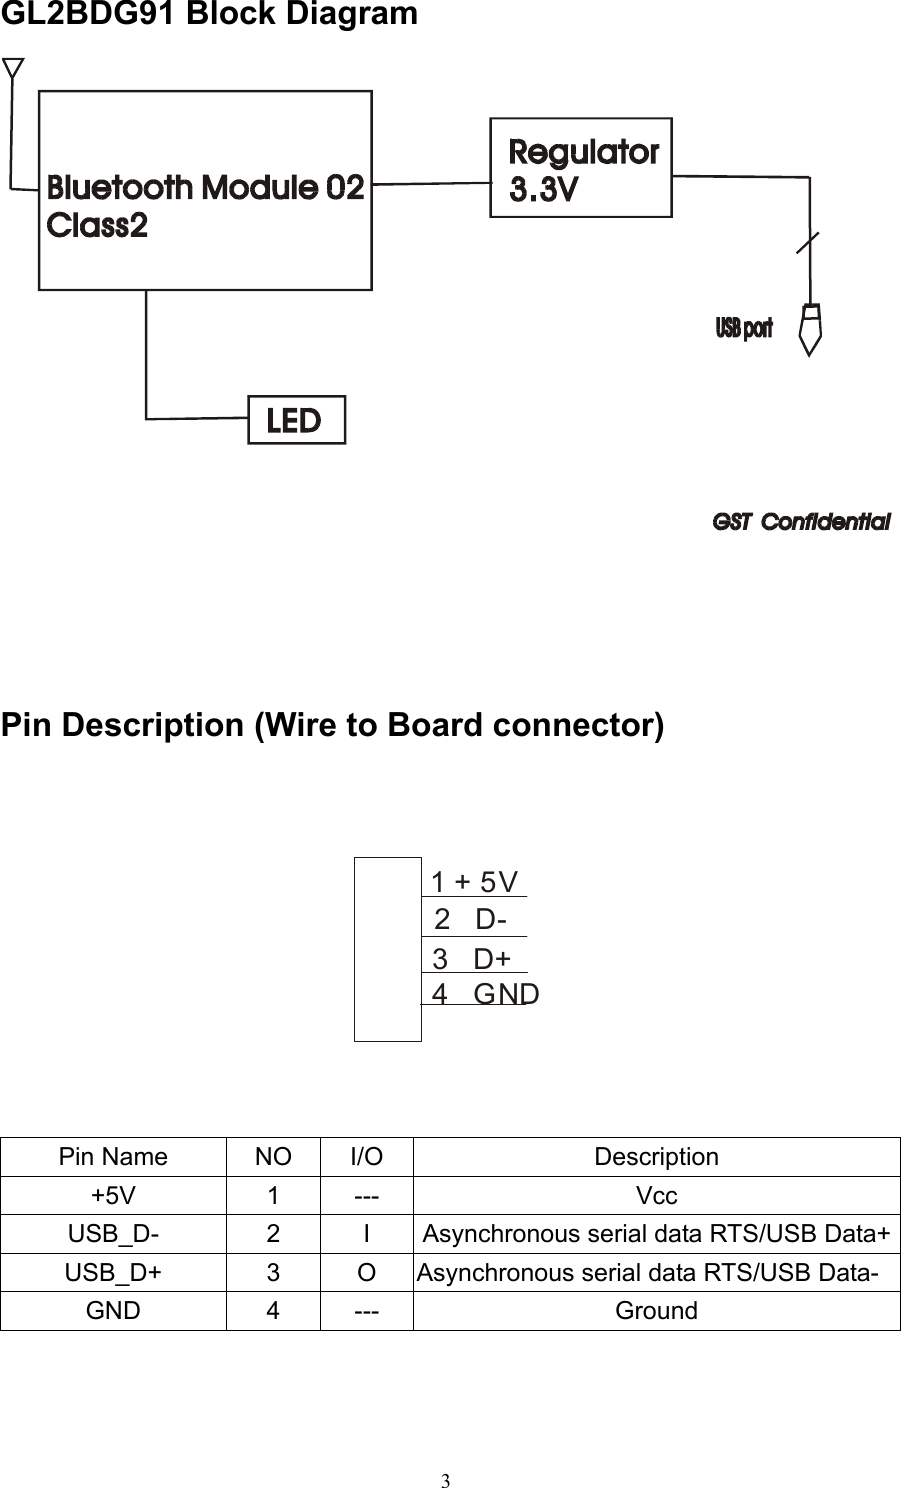  GL2BDG91 Block Diagram      Pin Description (Wire to Board connector)   1 + 5V2   D-3   D+4   GND   Pin Name  NO  I/O  Description +5V 1 ---  Vcc USB_D-  2  I  Asynchronous serial data RTS/USB Data+USB_D+  3  O  Asynchronous serial data RTS/USB Data- GND 4 ---  Ground   3